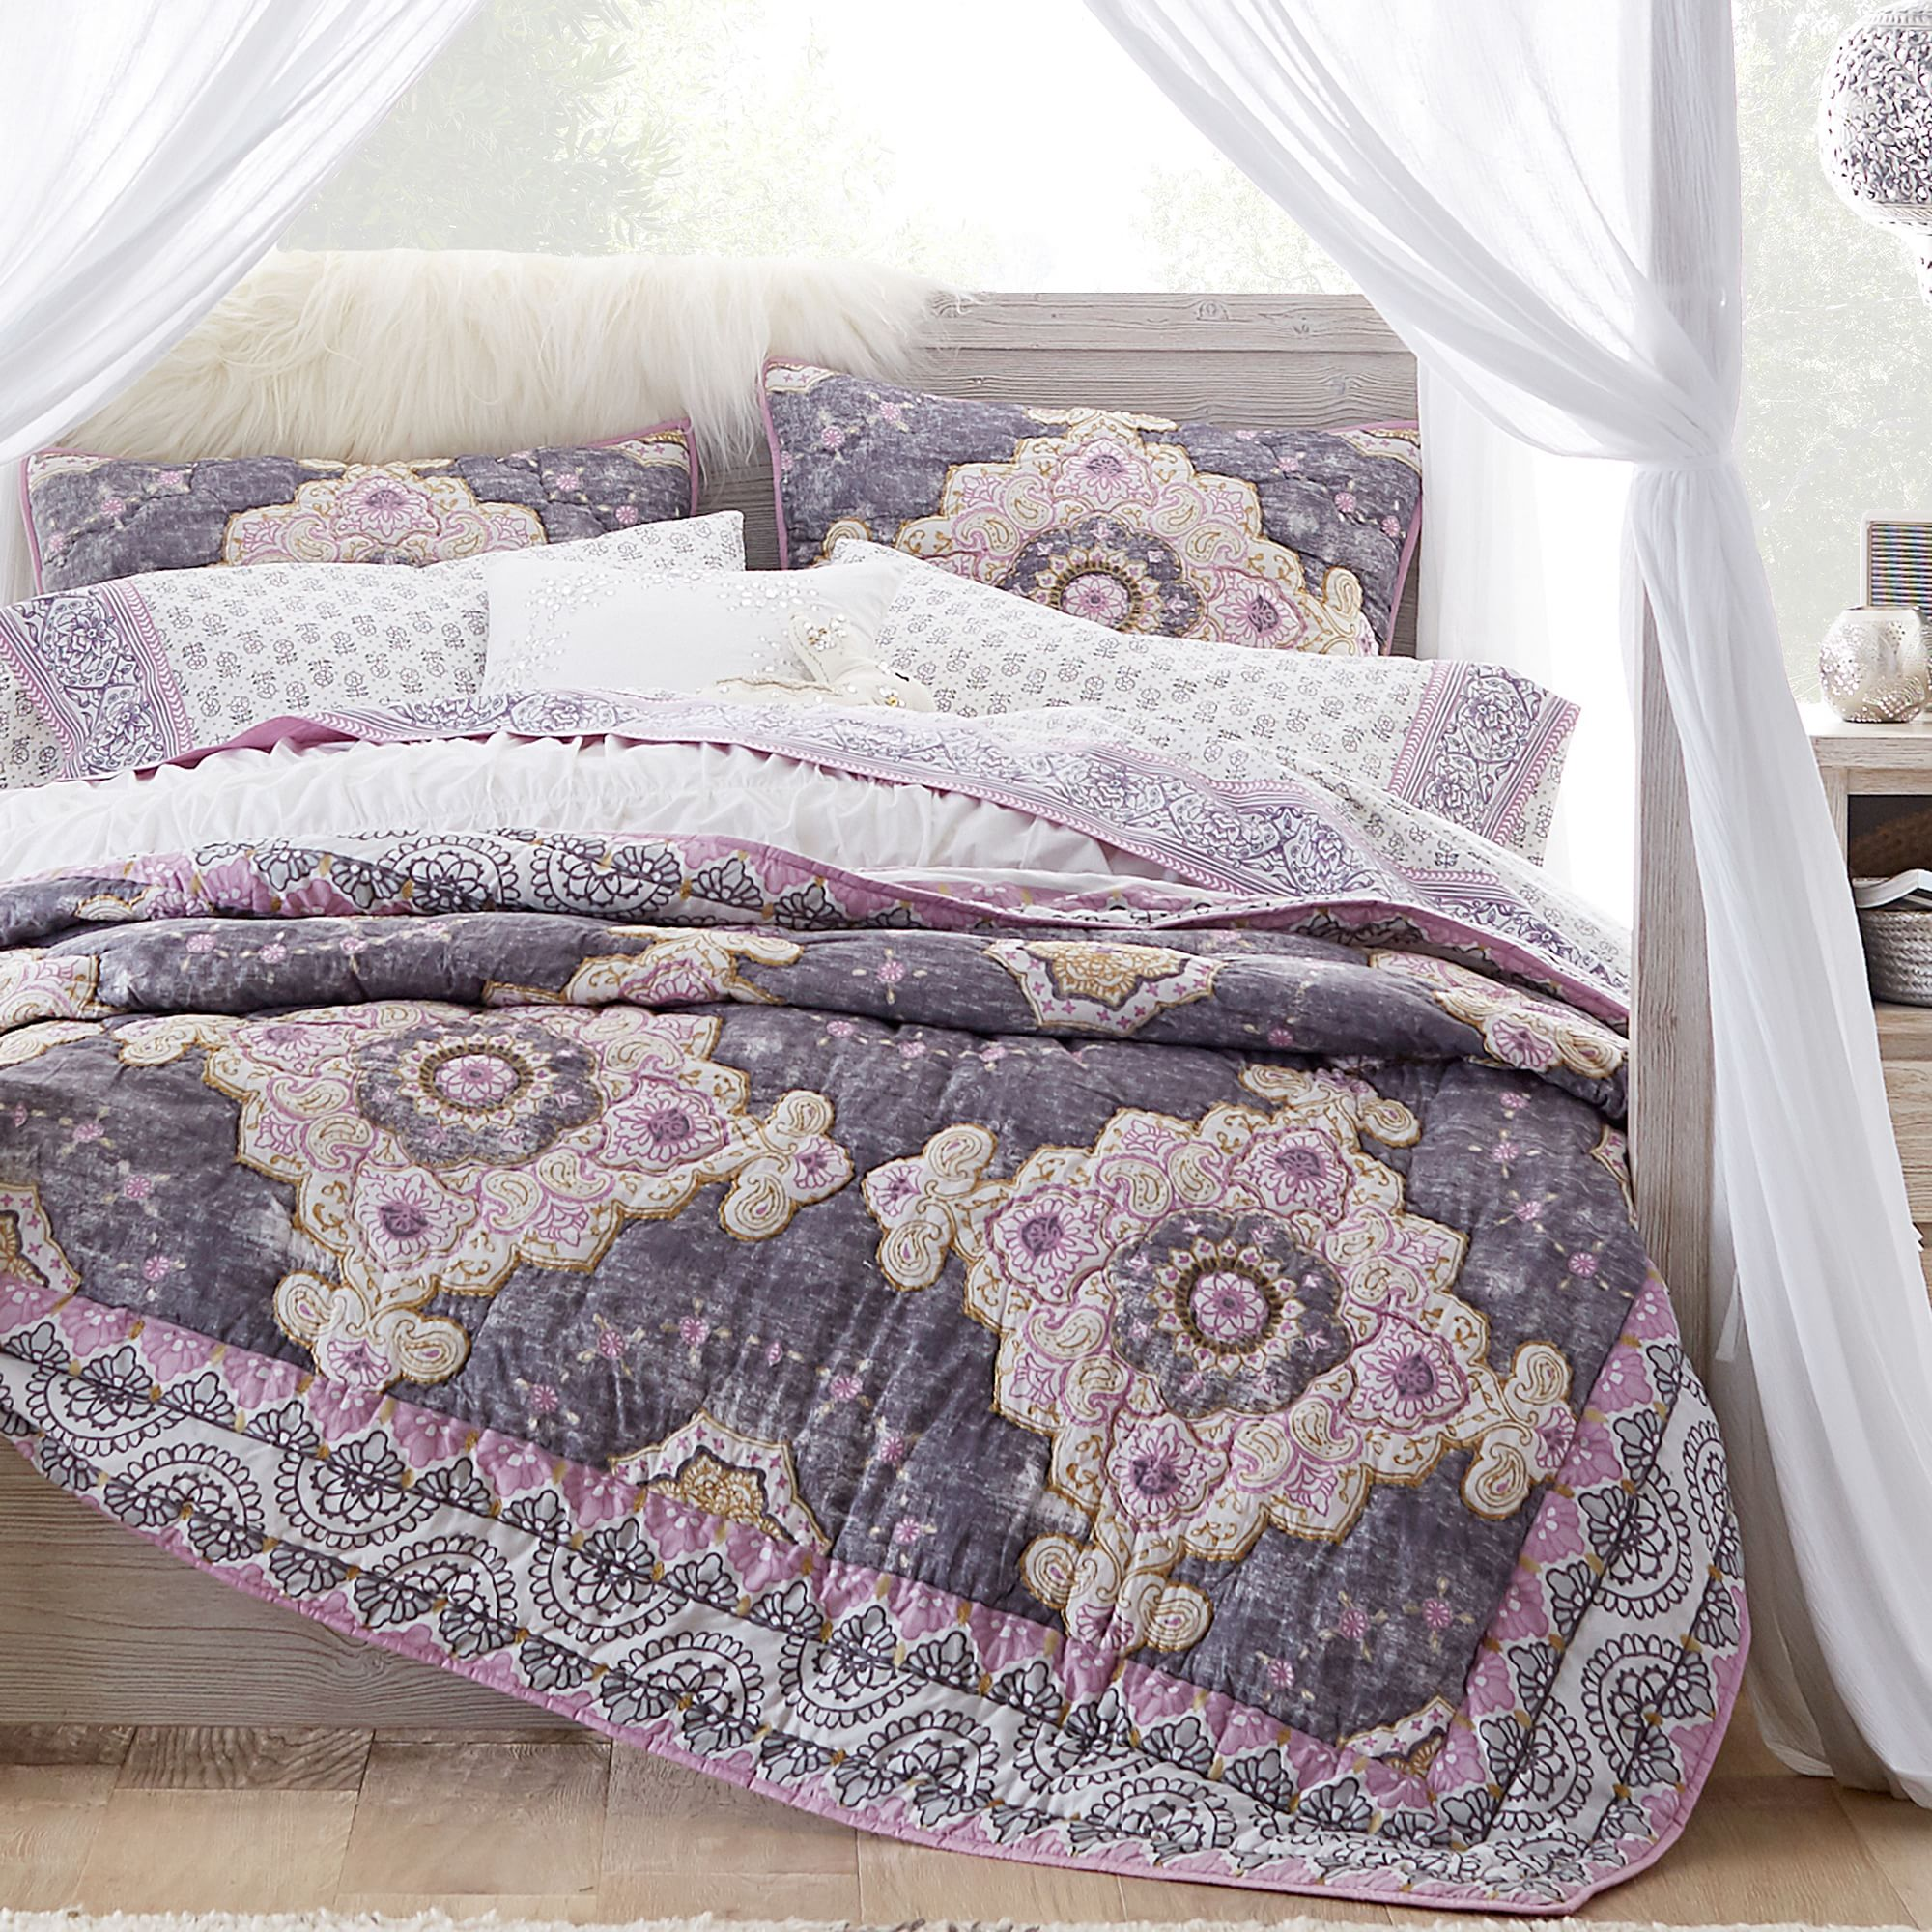 purple geometric patterned bedding with canopy